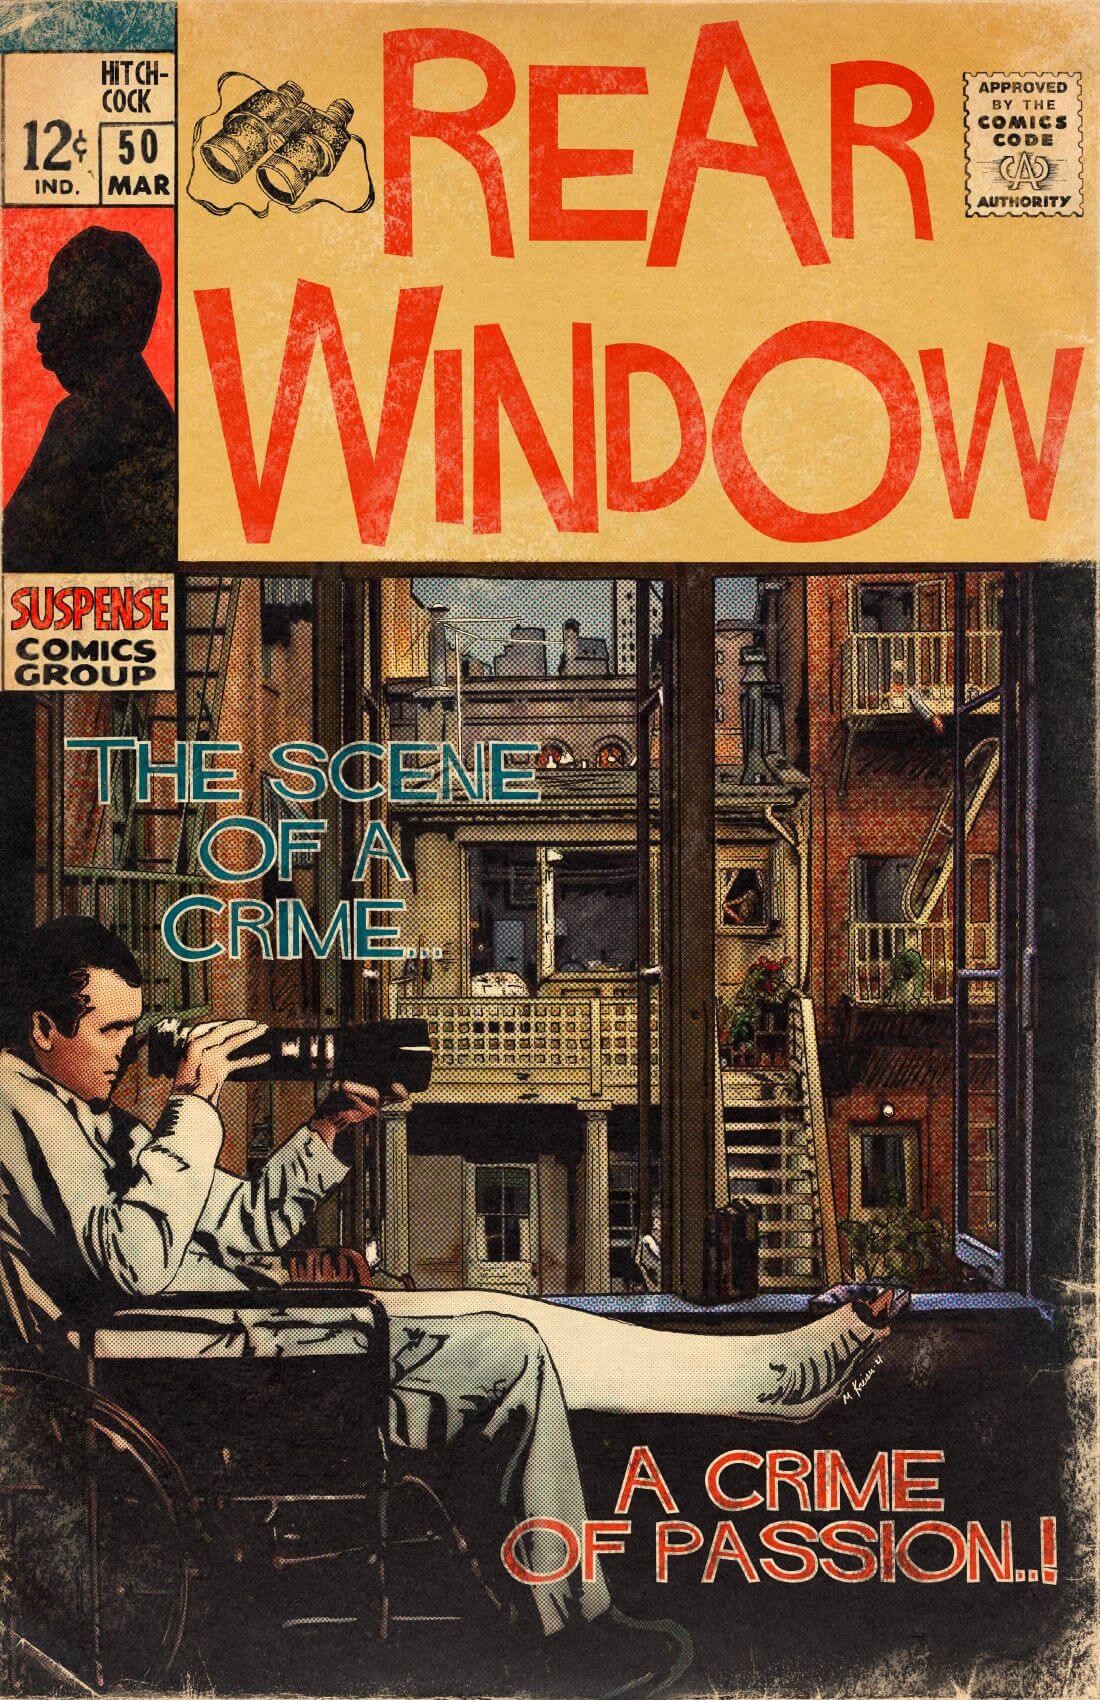 Rear Window Hitchcock Hollywood Movie Fan Art Poster Size Posters by Hitchcock. Buy Posters, Frames, Canvas & Digital Art Prints. Small, Compact, Medium and Large Variants